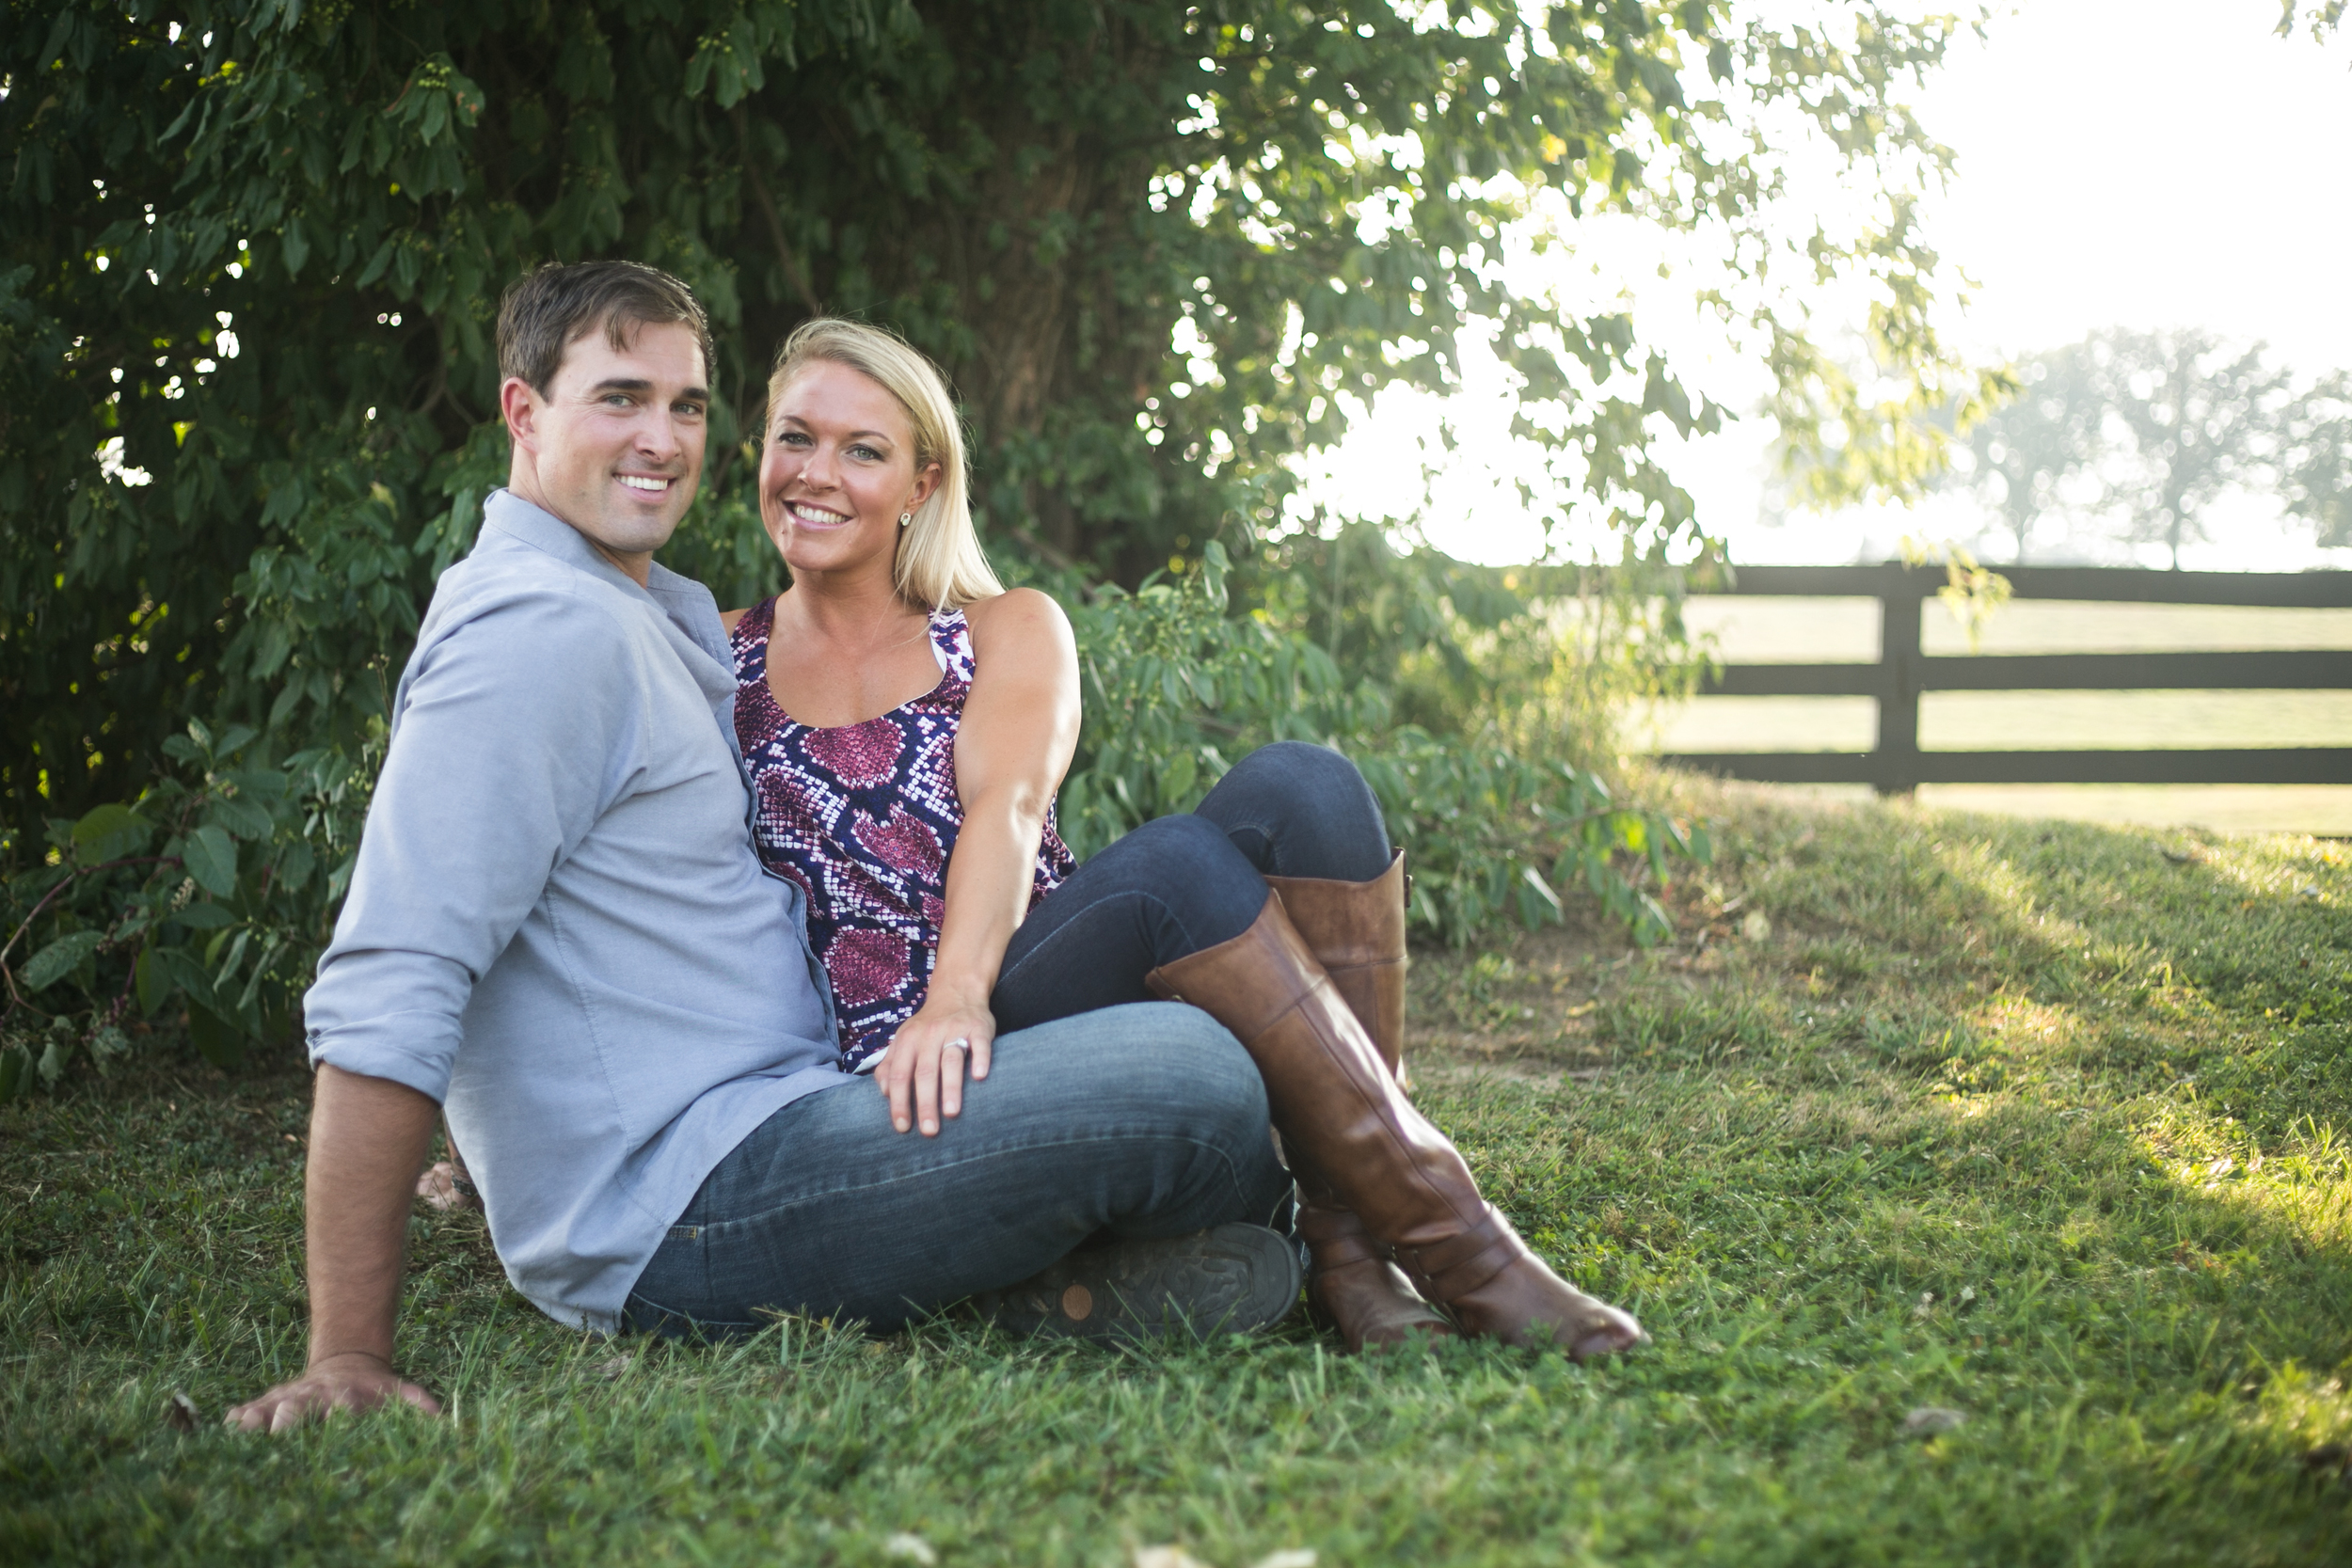 justin+tiffany-outdoor-farm-engagement-session-living-radiant-photography-131.jpg